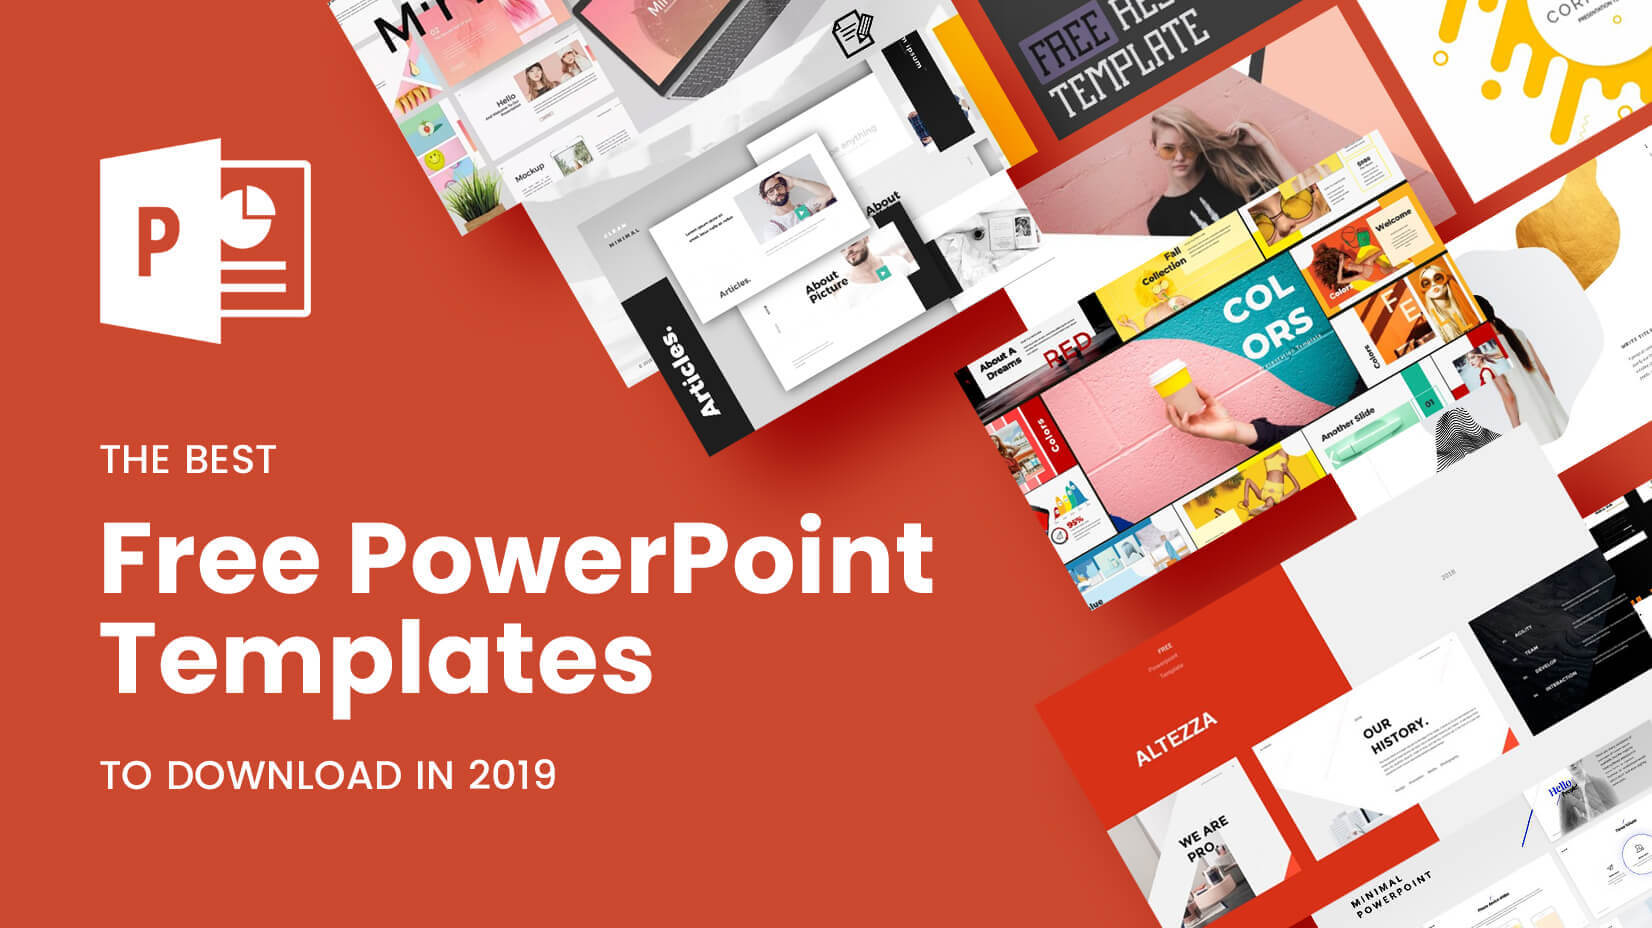 The Best Free Powerpoint Templates To Download In 2019 Pertaining To Powerpoint Slides Design Templates For Free